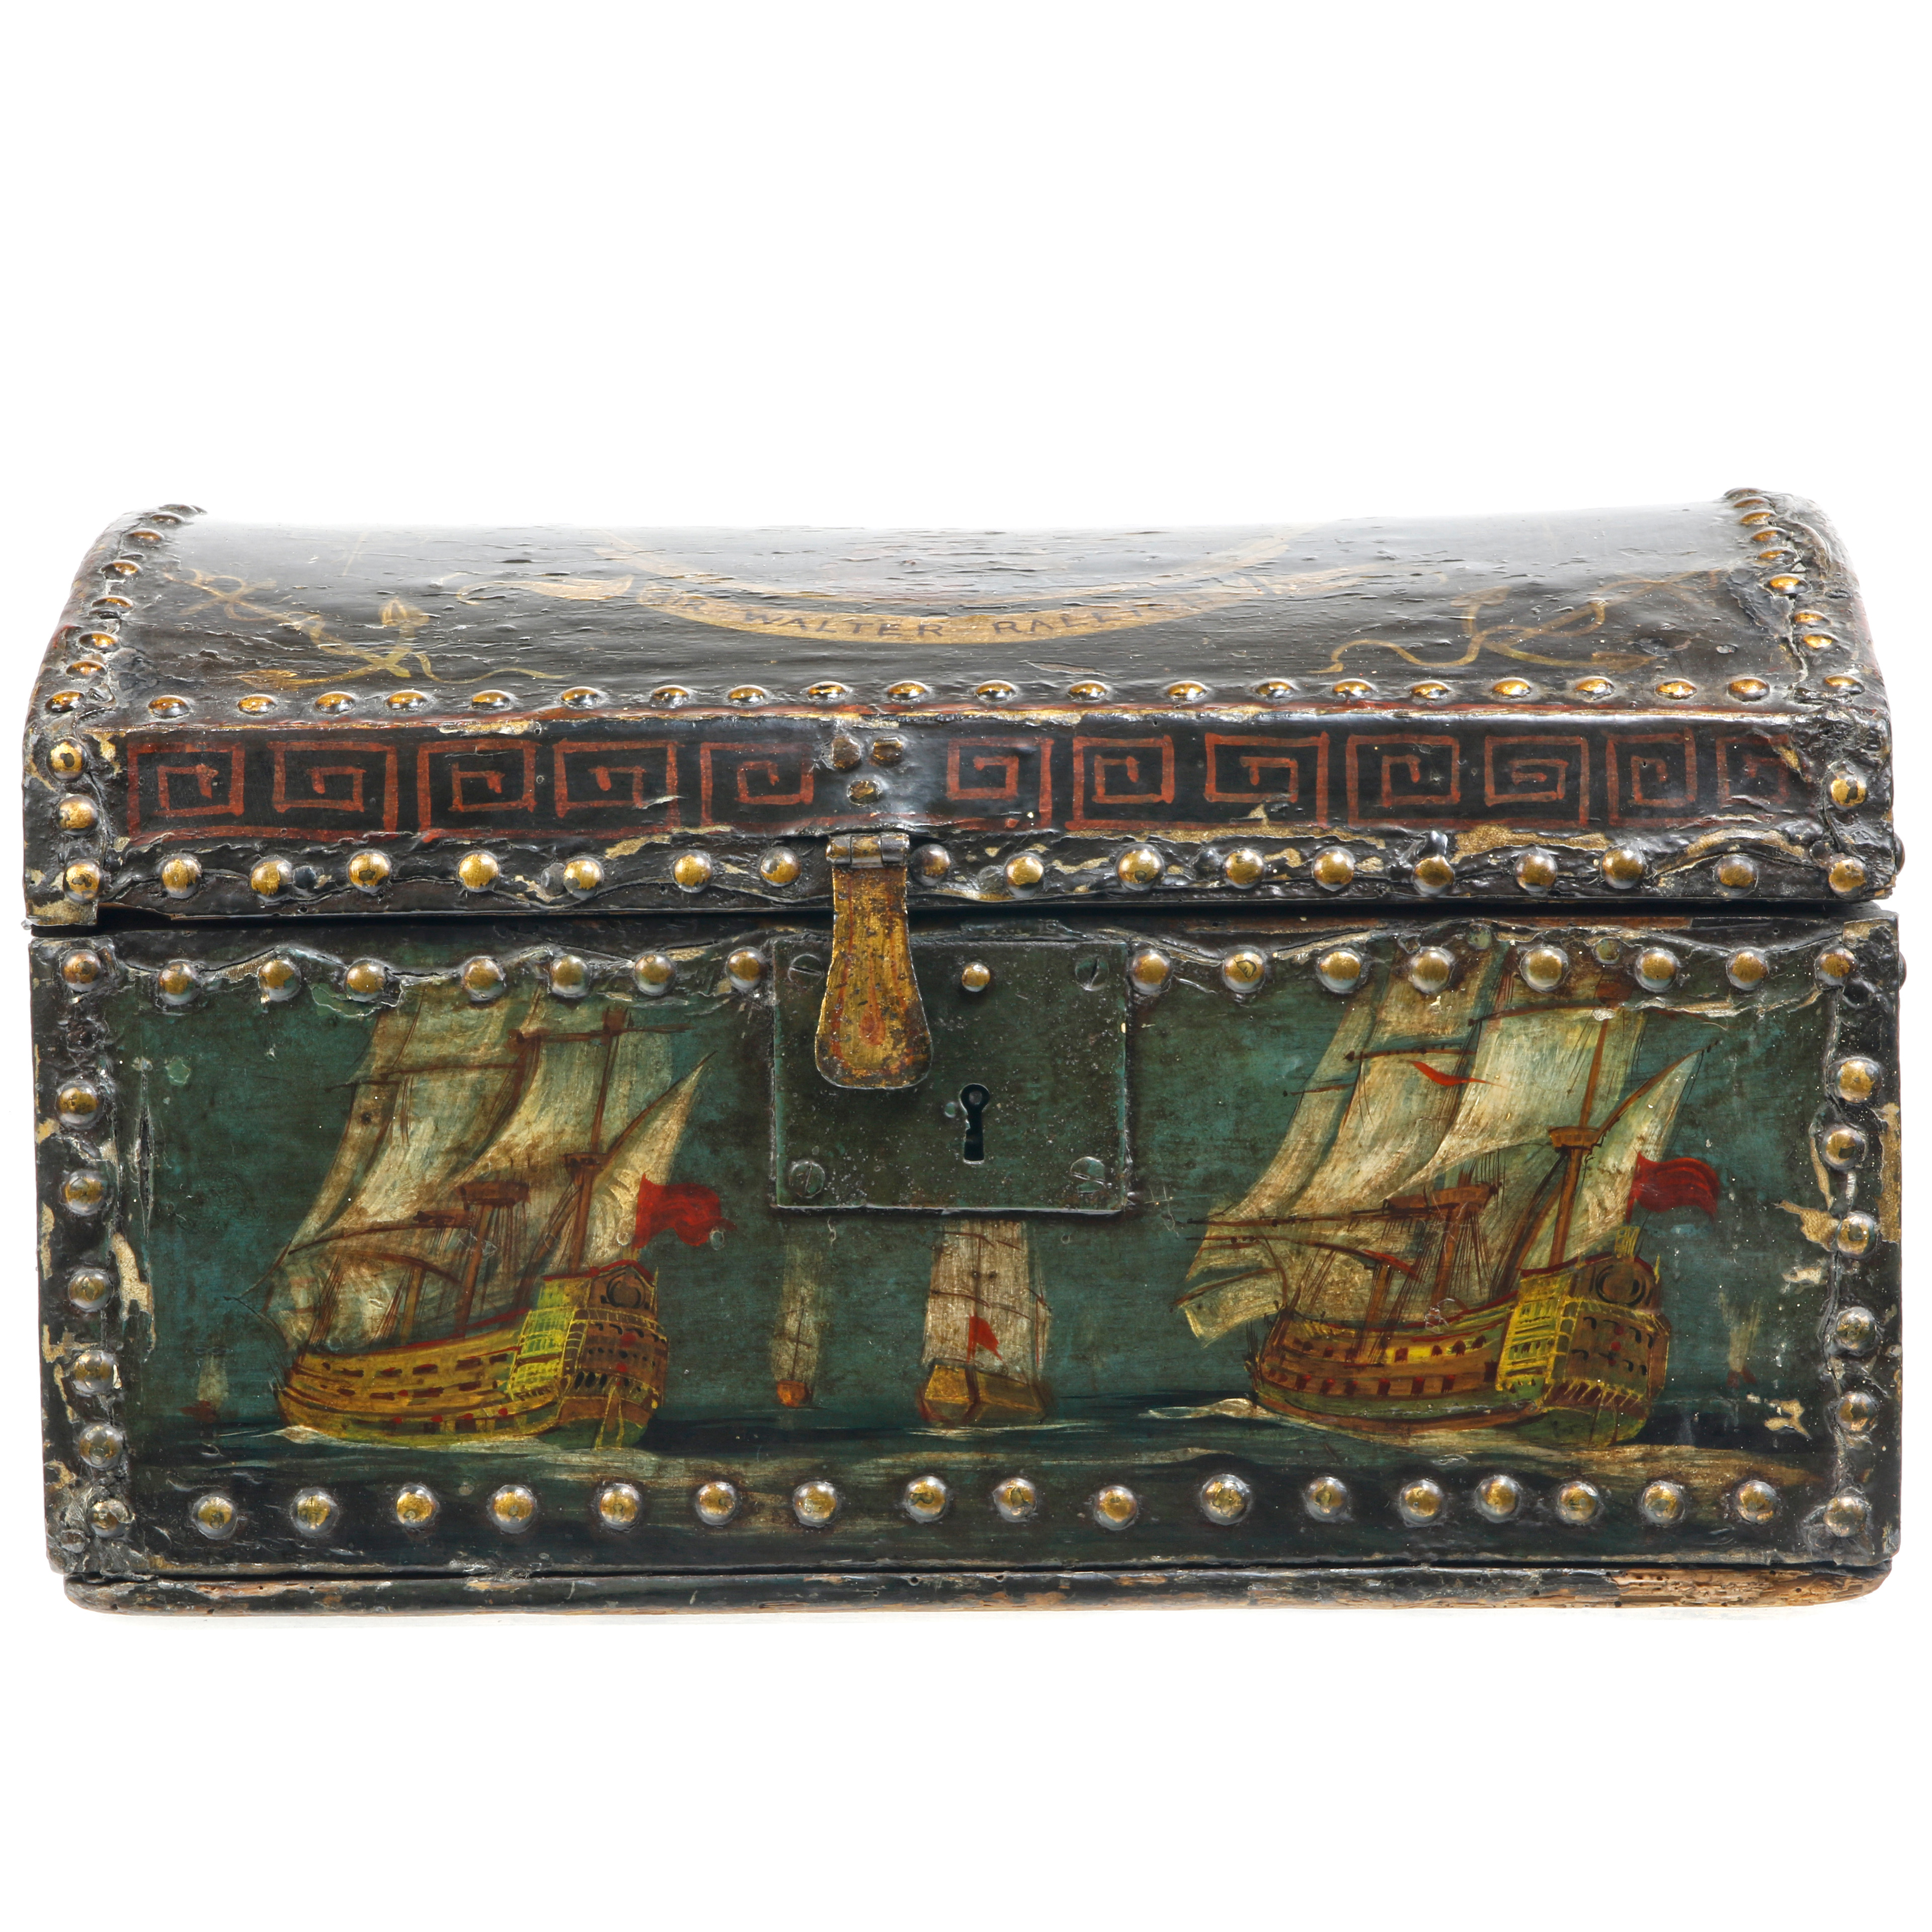 ENGLISH PAINTED CHEST THE TOP 3a4c77